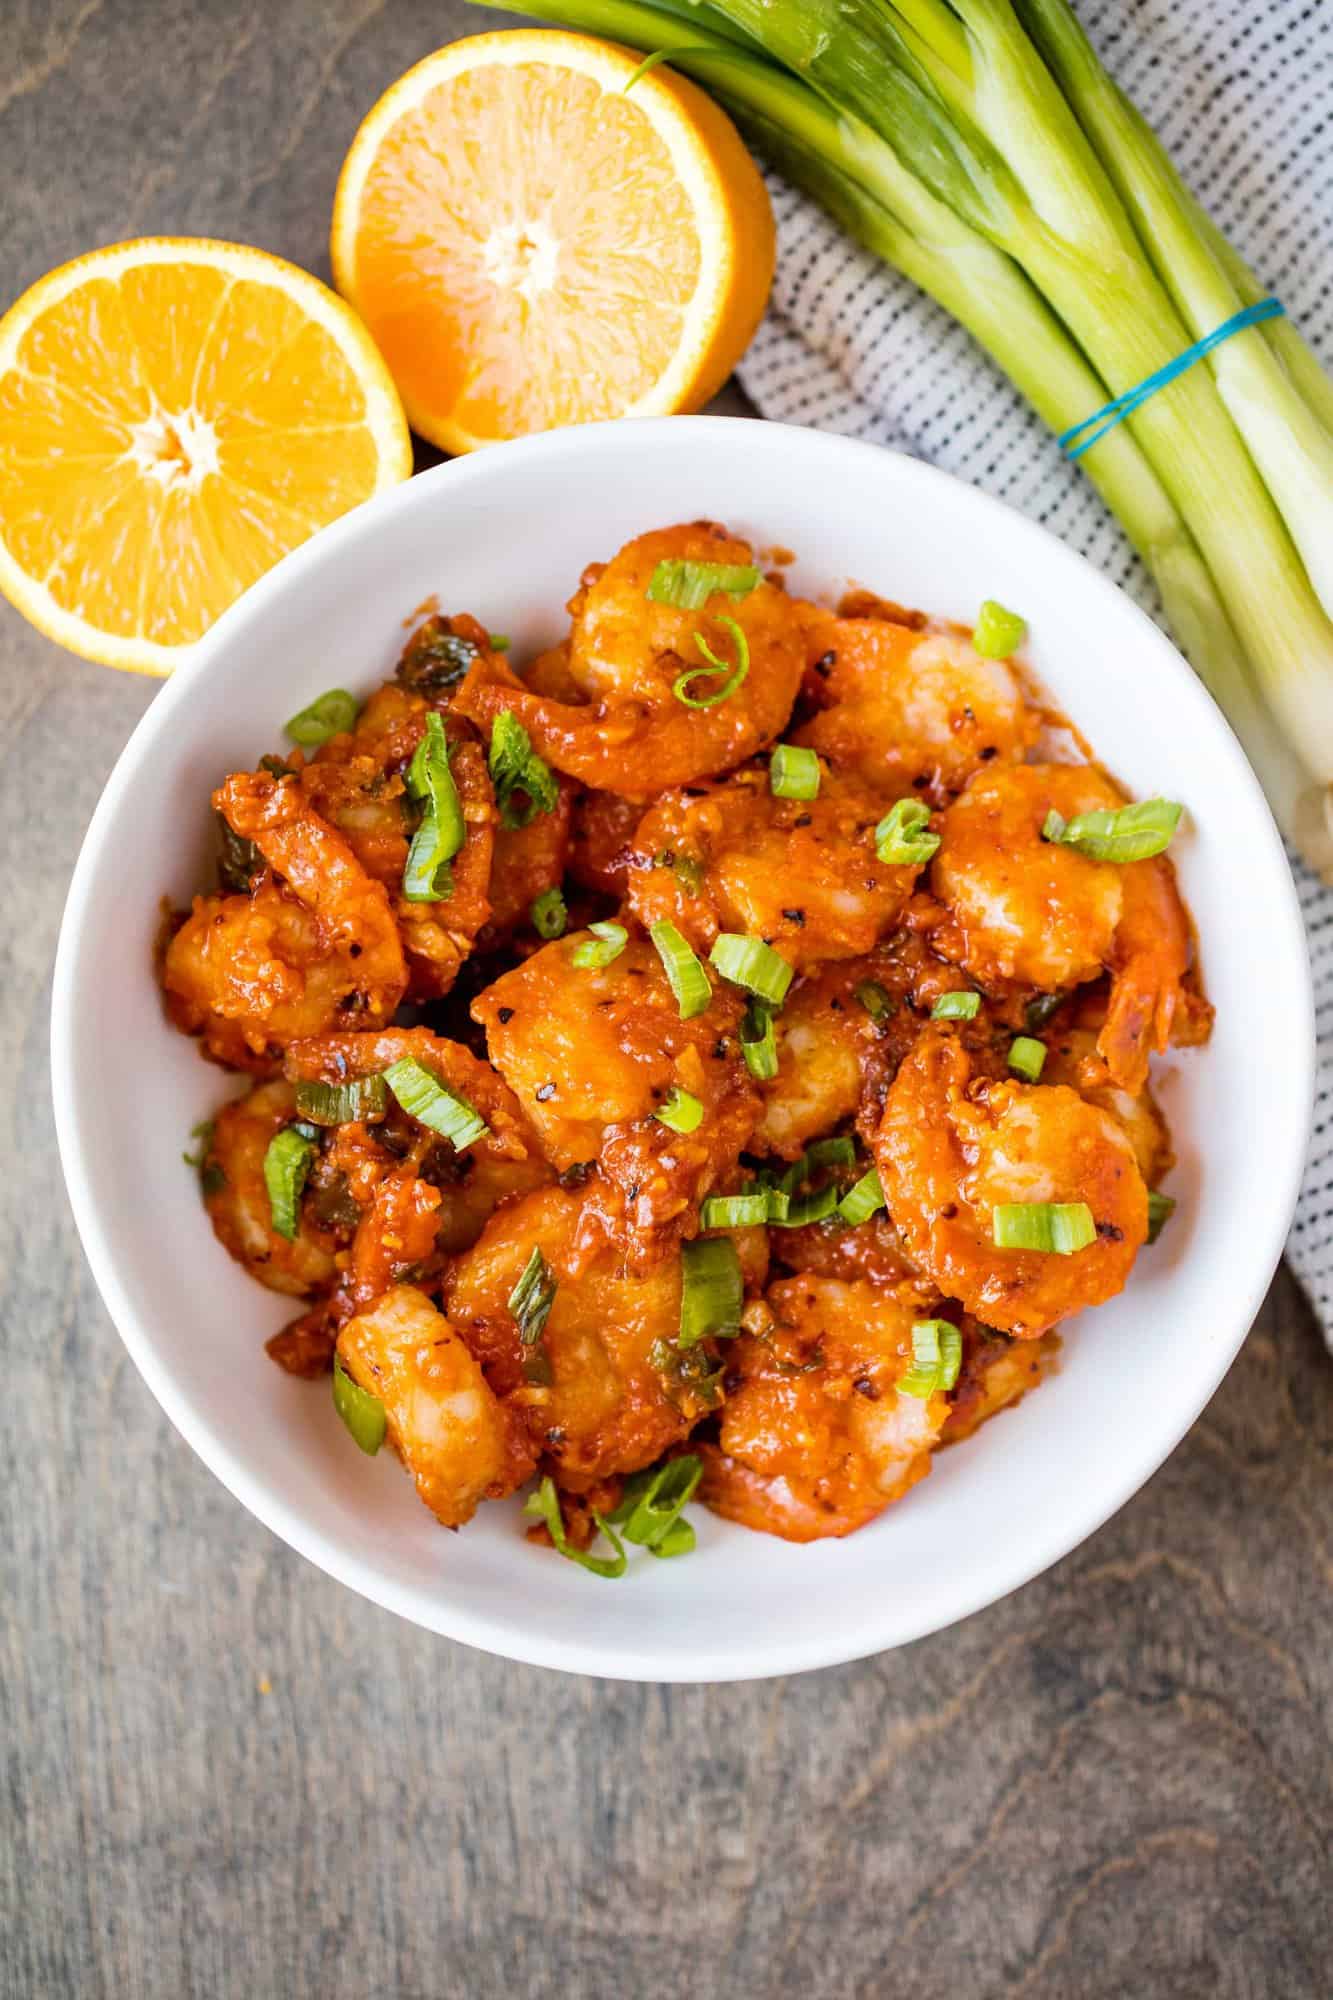 Orange Peel Shrimp is a fast and easy seafood dinner idea that will become an instant favorite. Serve this easy shrimp recipe up over some steamed rice with a side of broccoli. And that orange glaze is to die for!